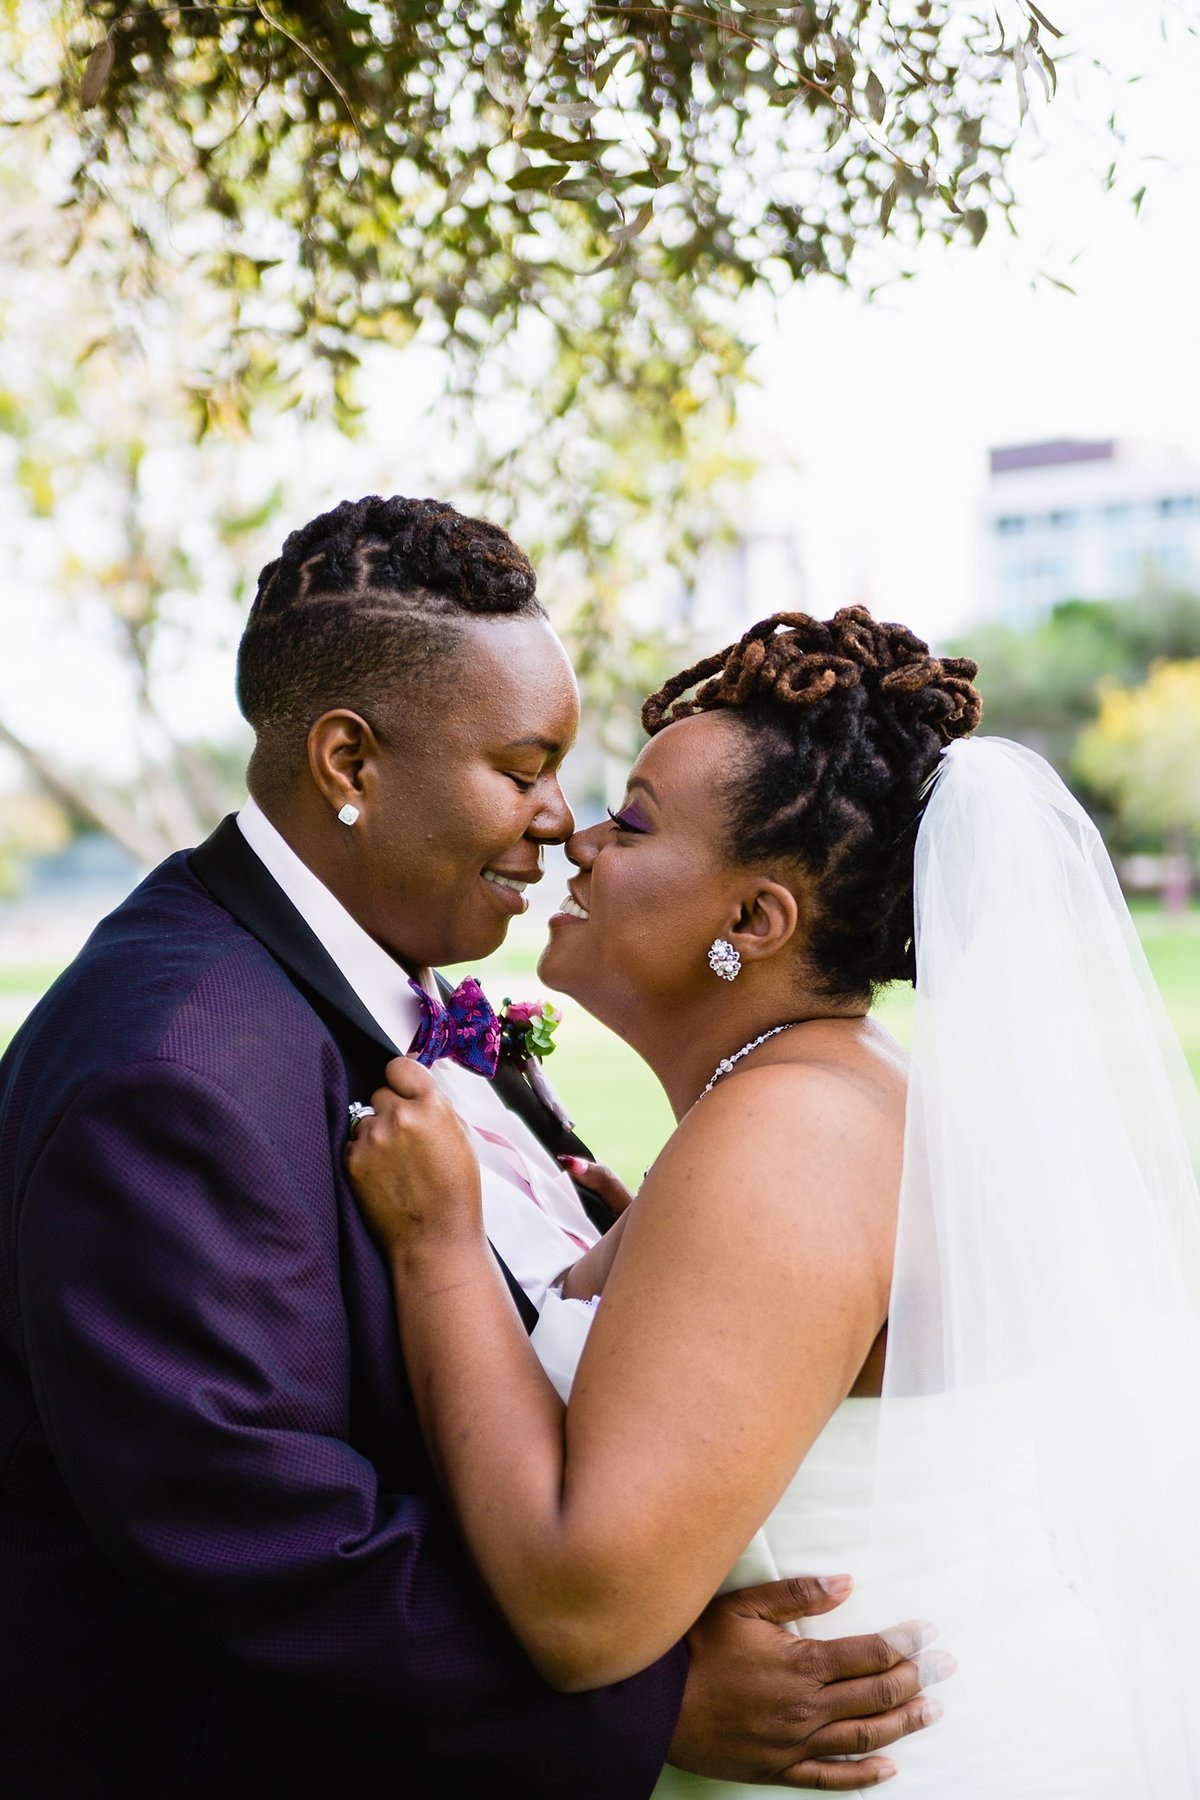 LGBTQ brides share a romantic moment on their wedding day by PMA Photography.